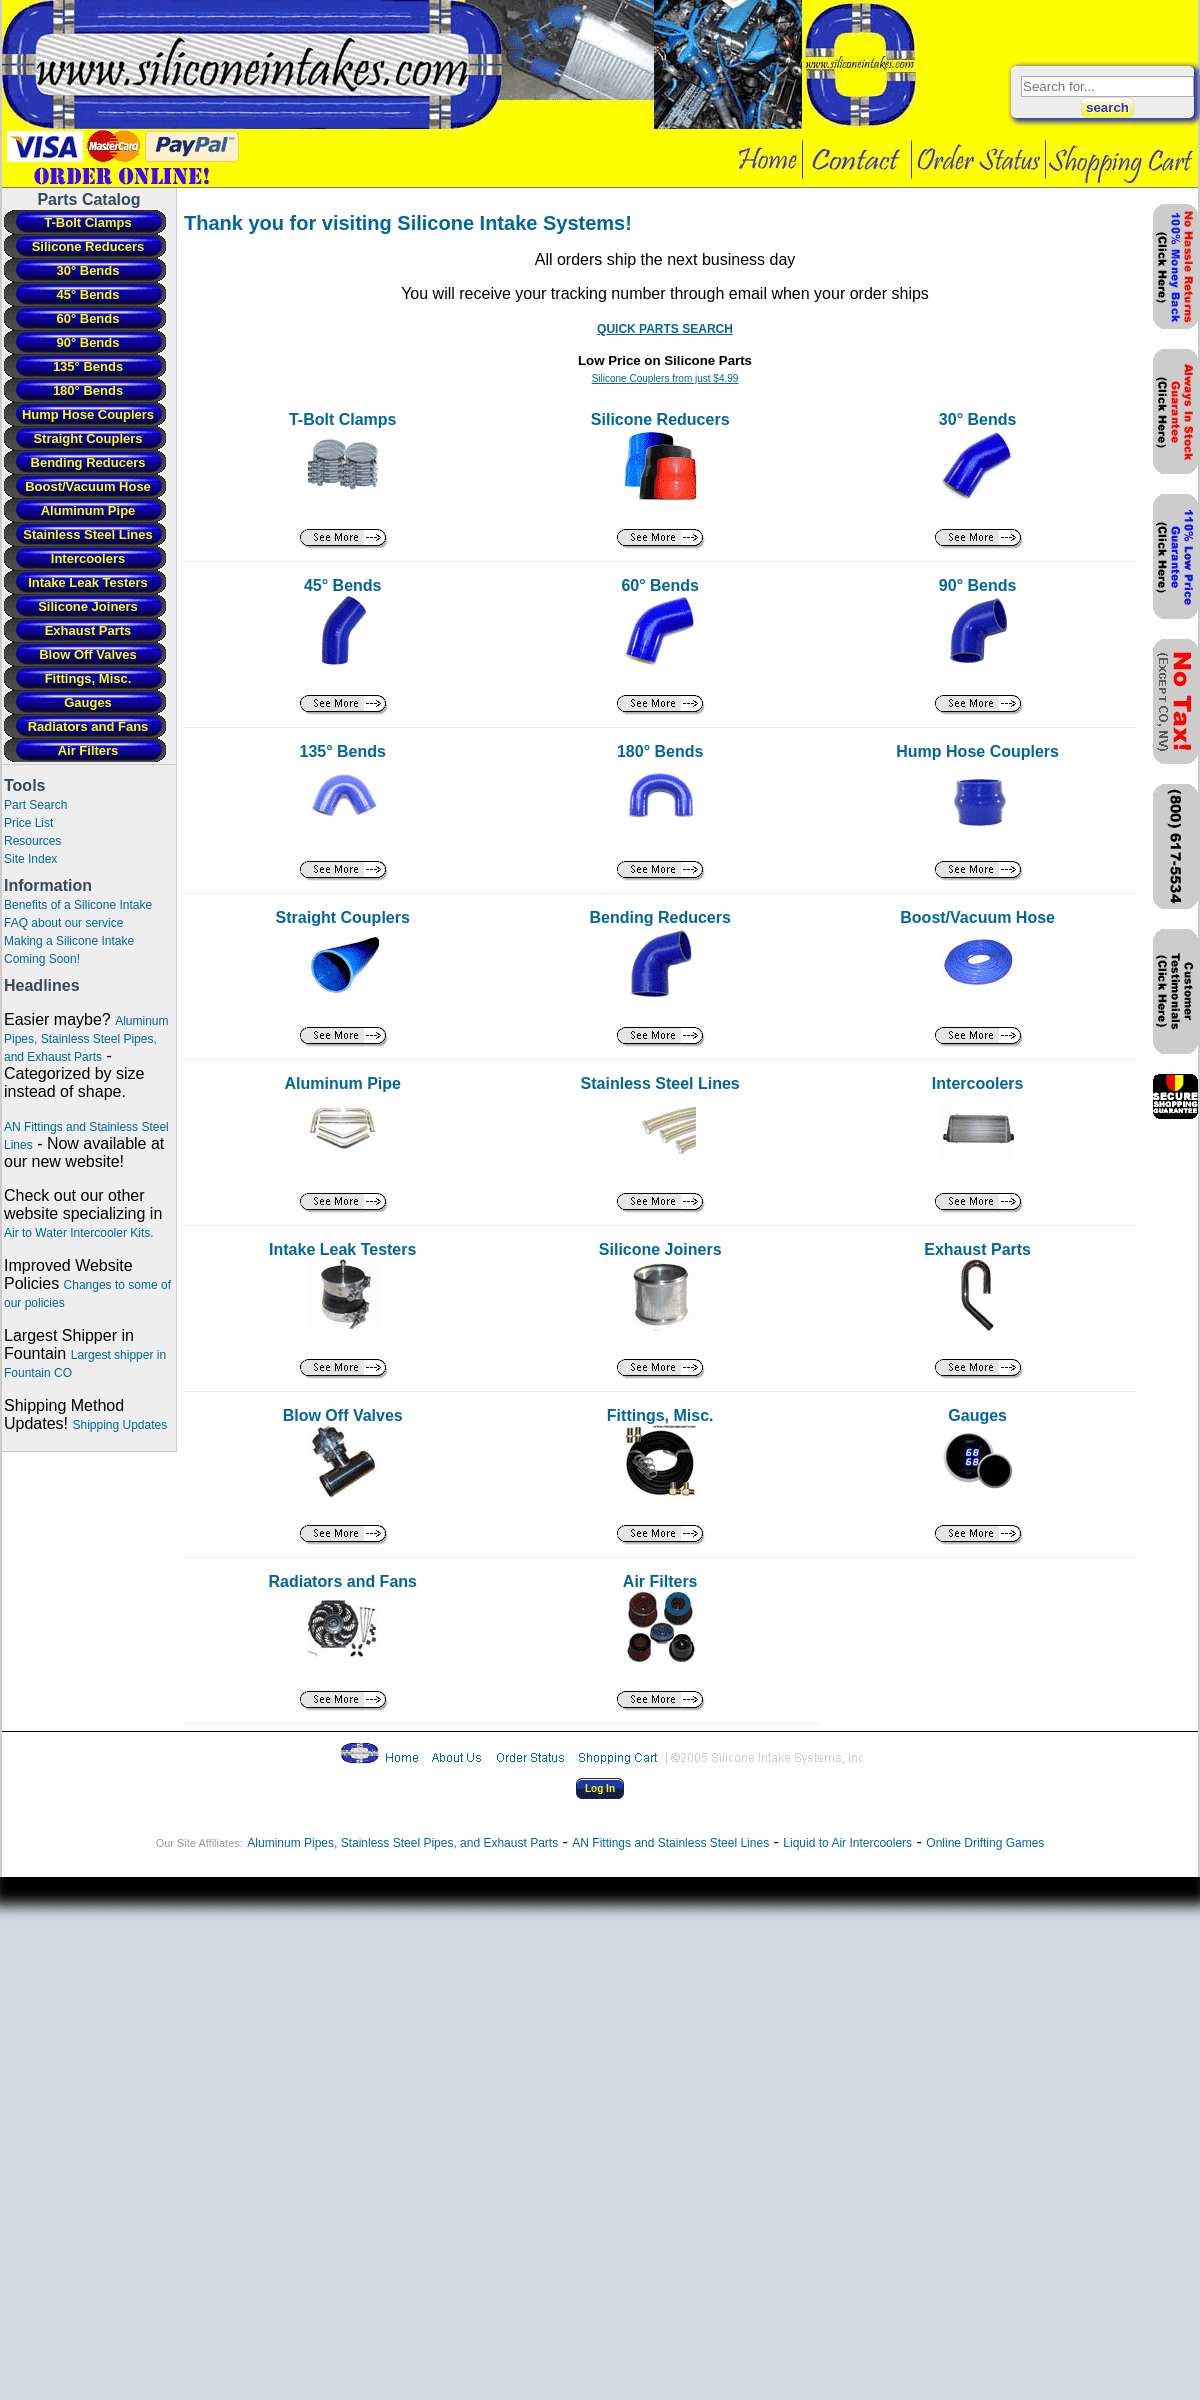 A complete backup of siliconeintakes.com